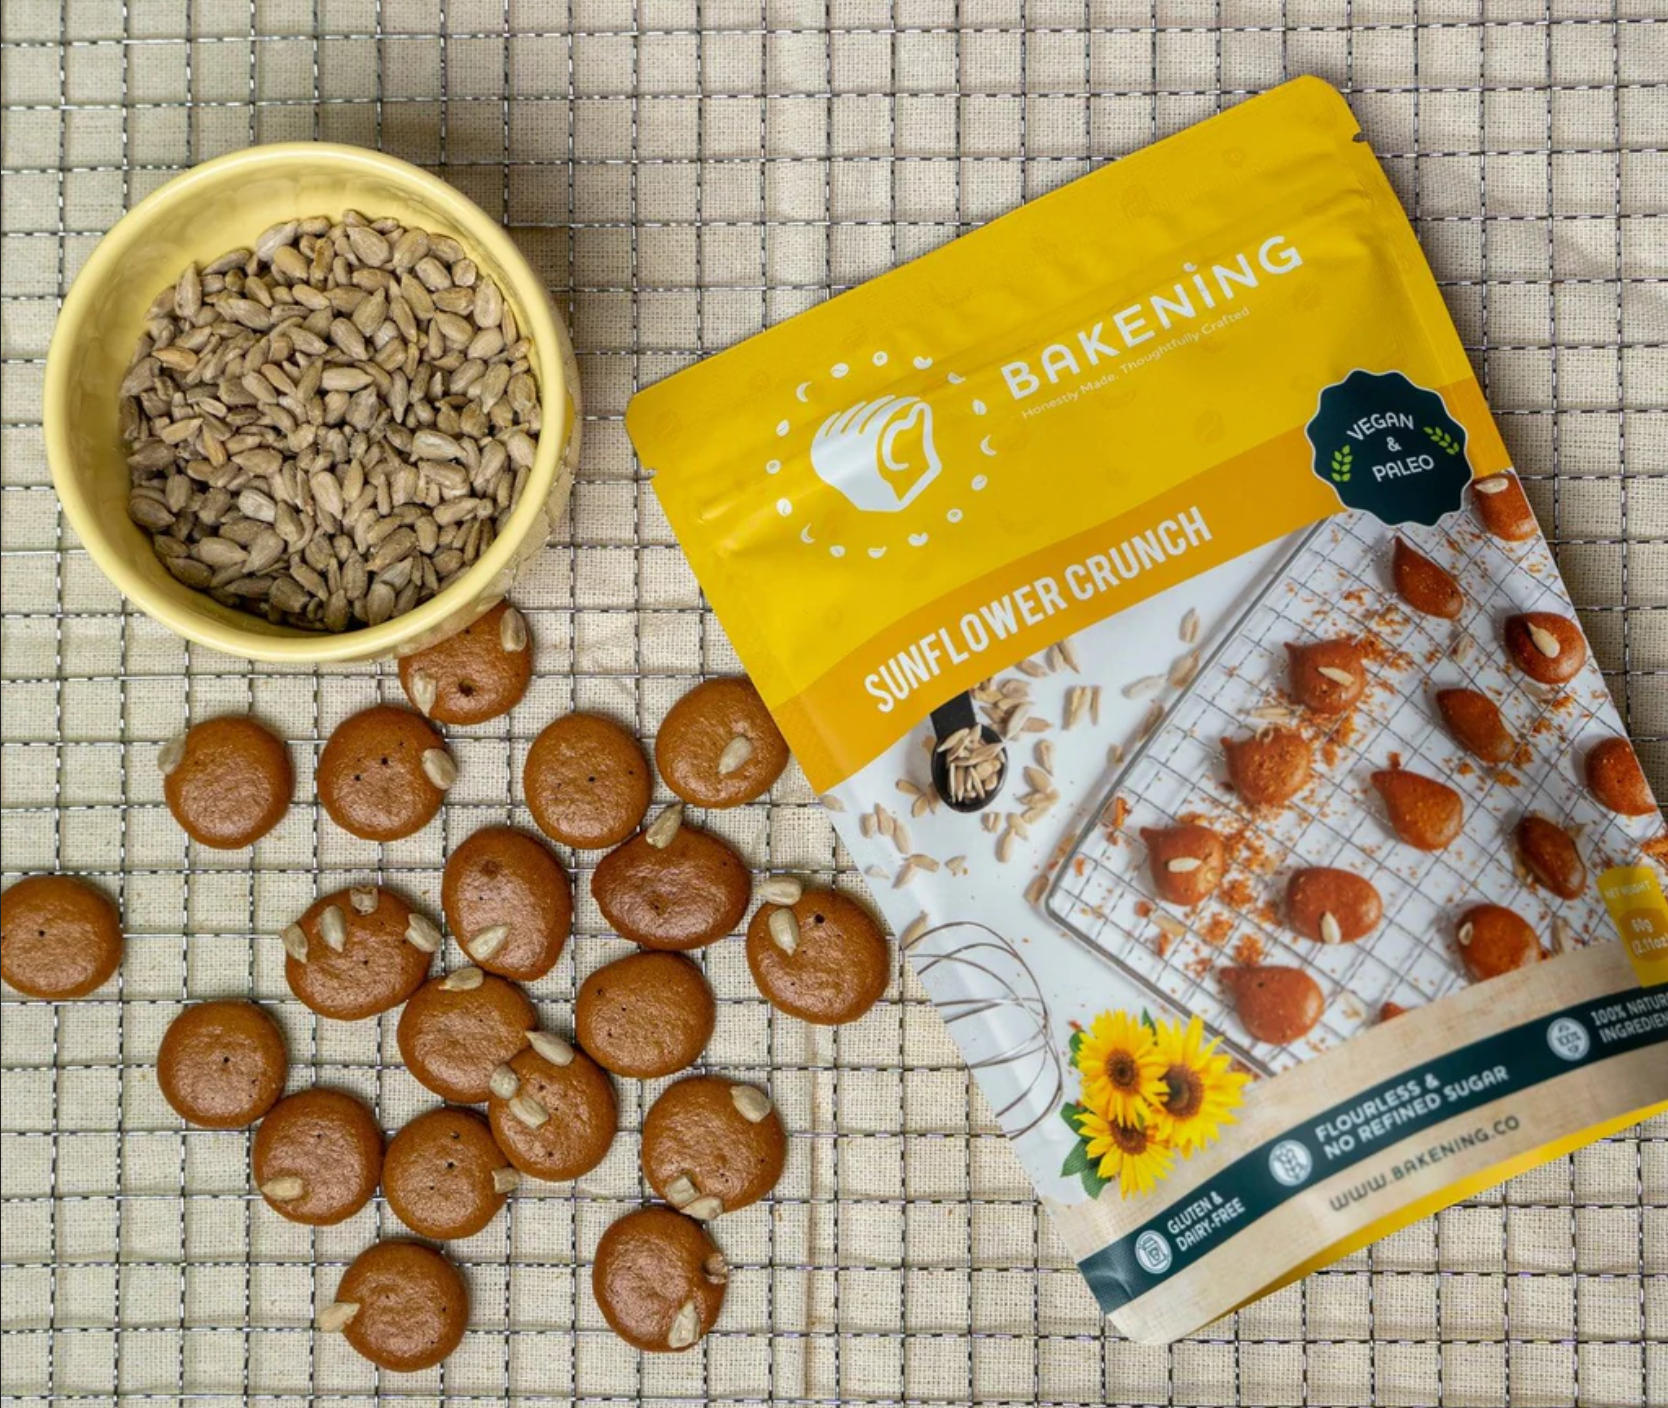 Bakening Sunflower Crunch Cookies | Buy at The Green Collective